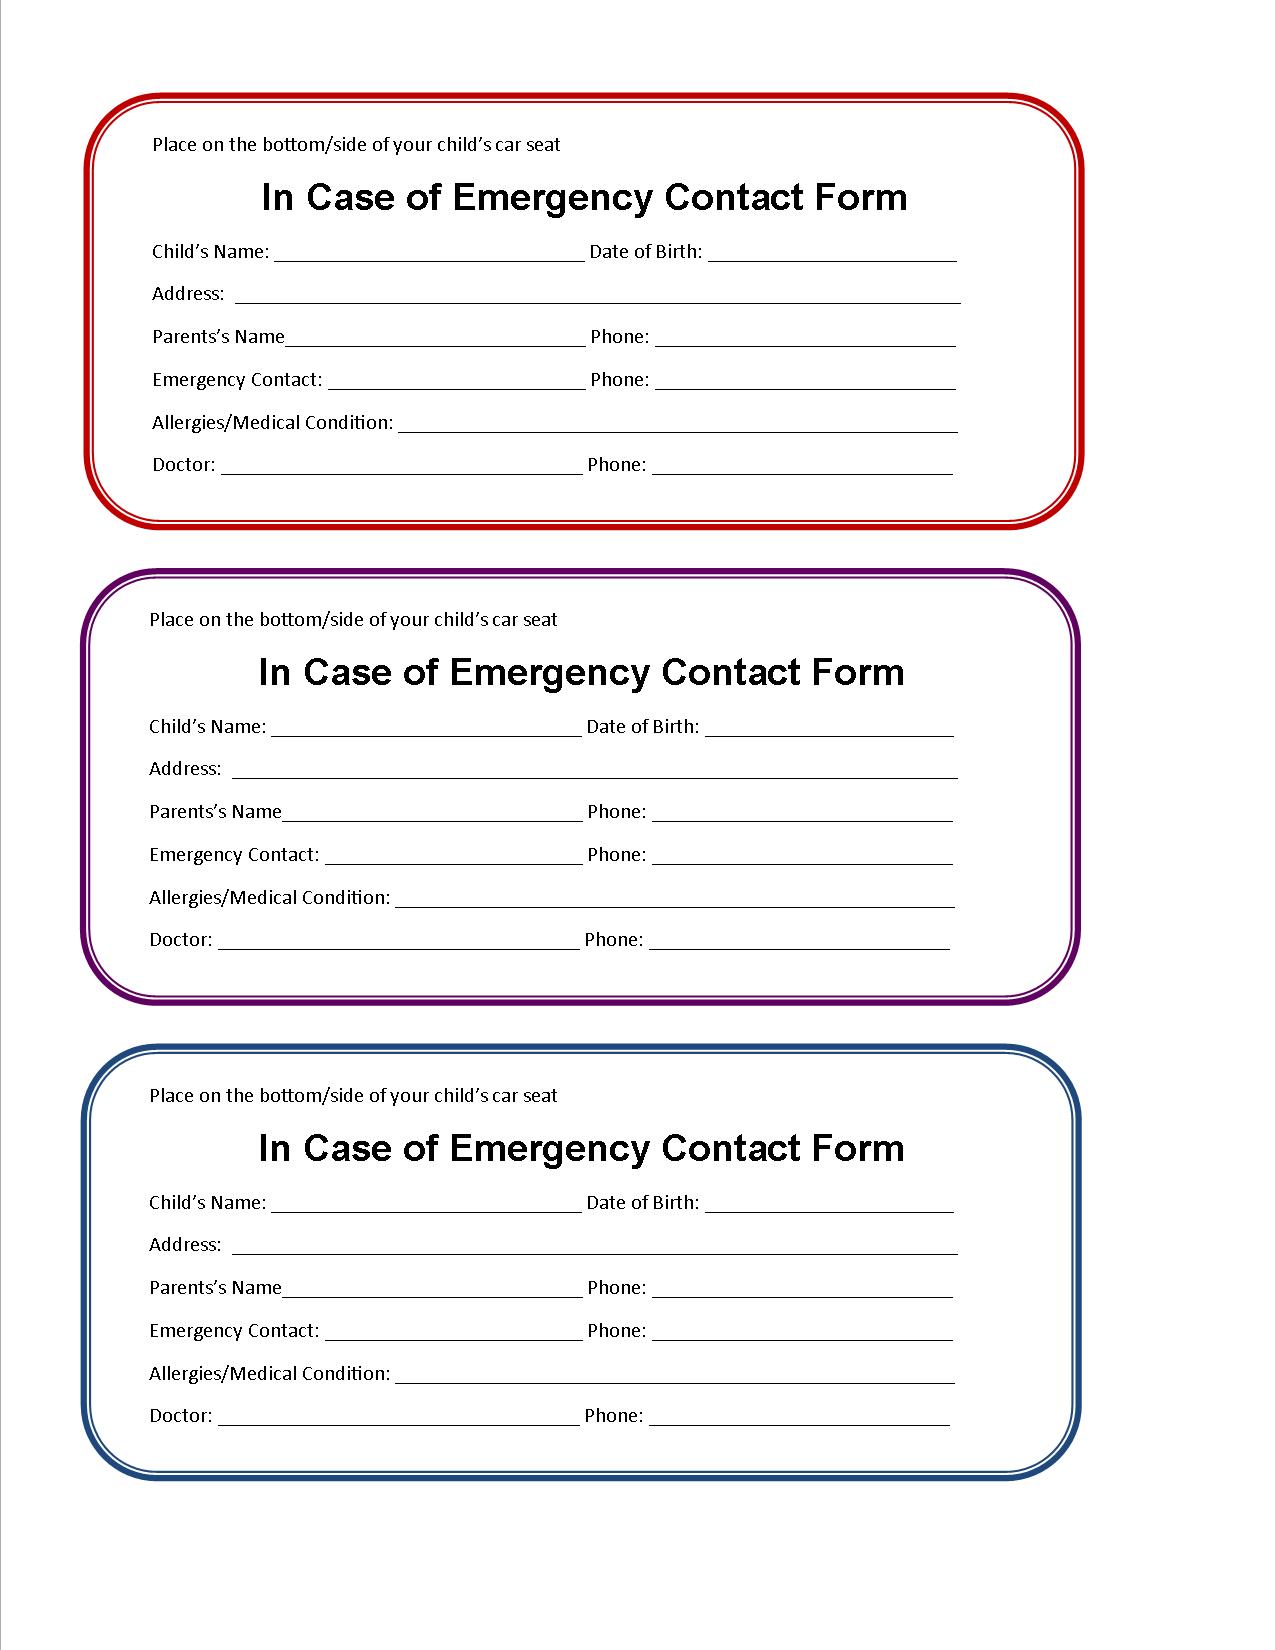 7-best-images-of-emergency-contact-printable-form-printable-emergency-contact-form-template